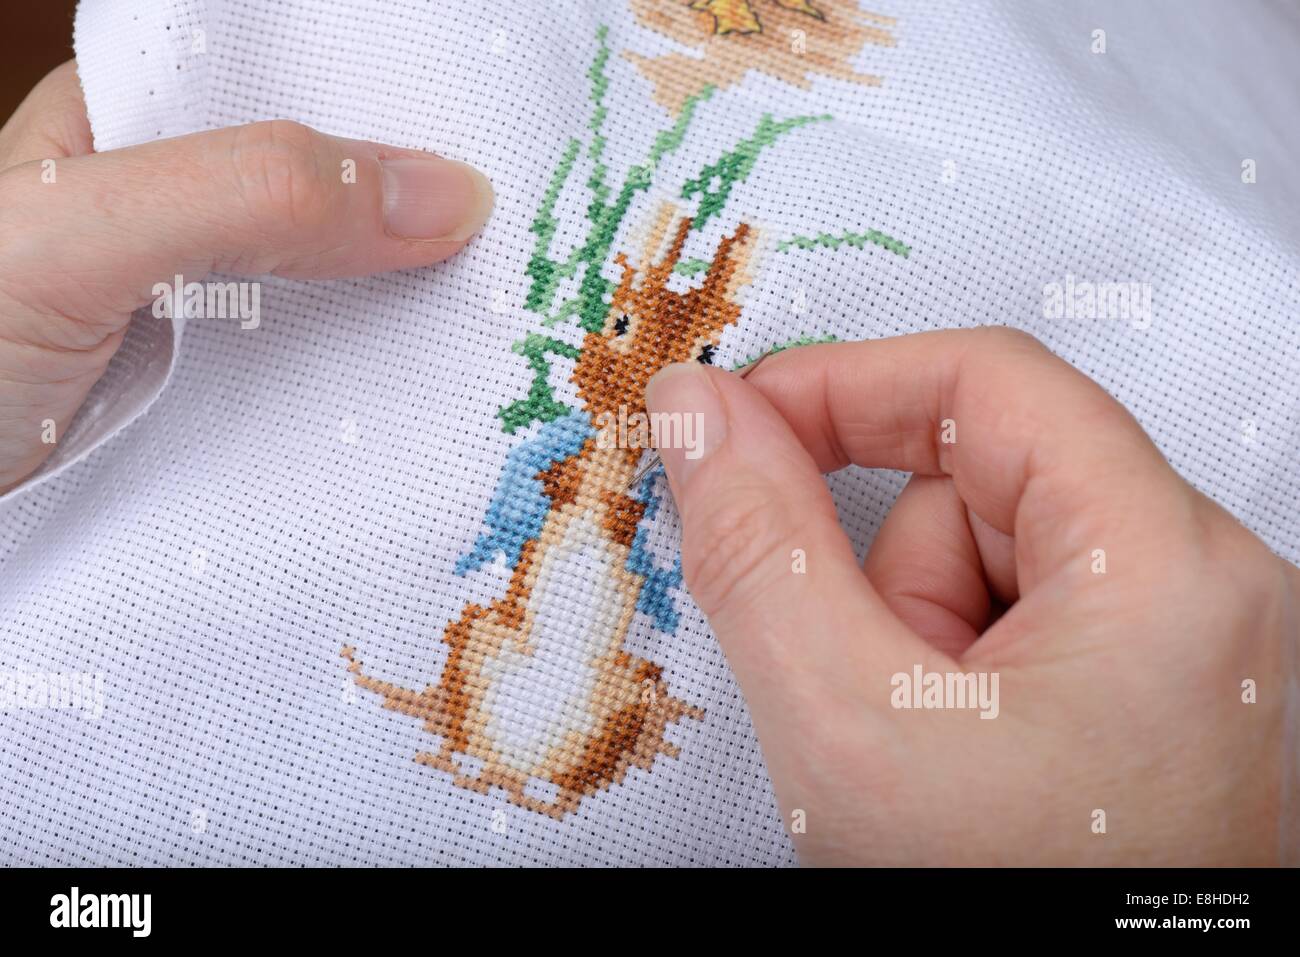 Close-up of woman's hands cross stitching with needle and thread. Stock Photo